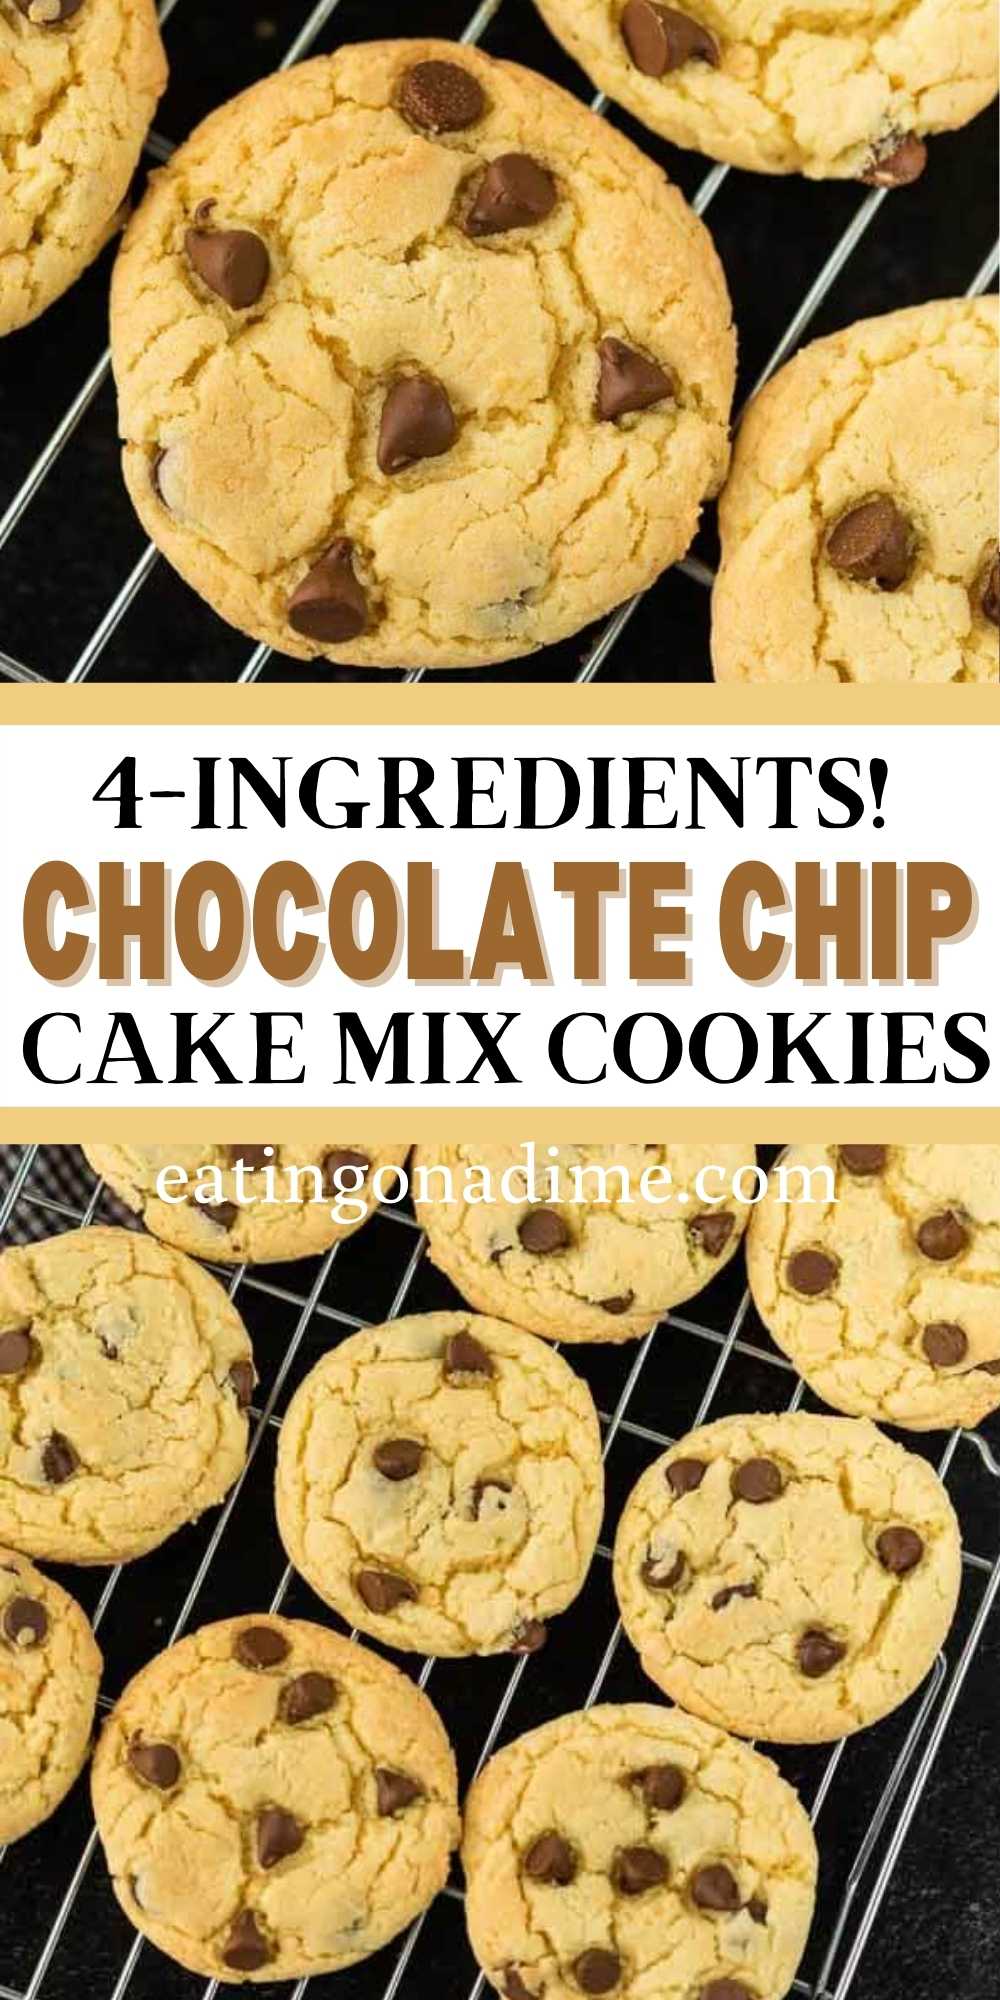 Cake mix cookies are the best! Make this Easy Cake mix chocolate chip cookie recipe. These chocolate chip cake mix cookies are easy to make with only 4 ingredients and taste great! #eatingonadime #cookierecipes #dessertrecipes 
